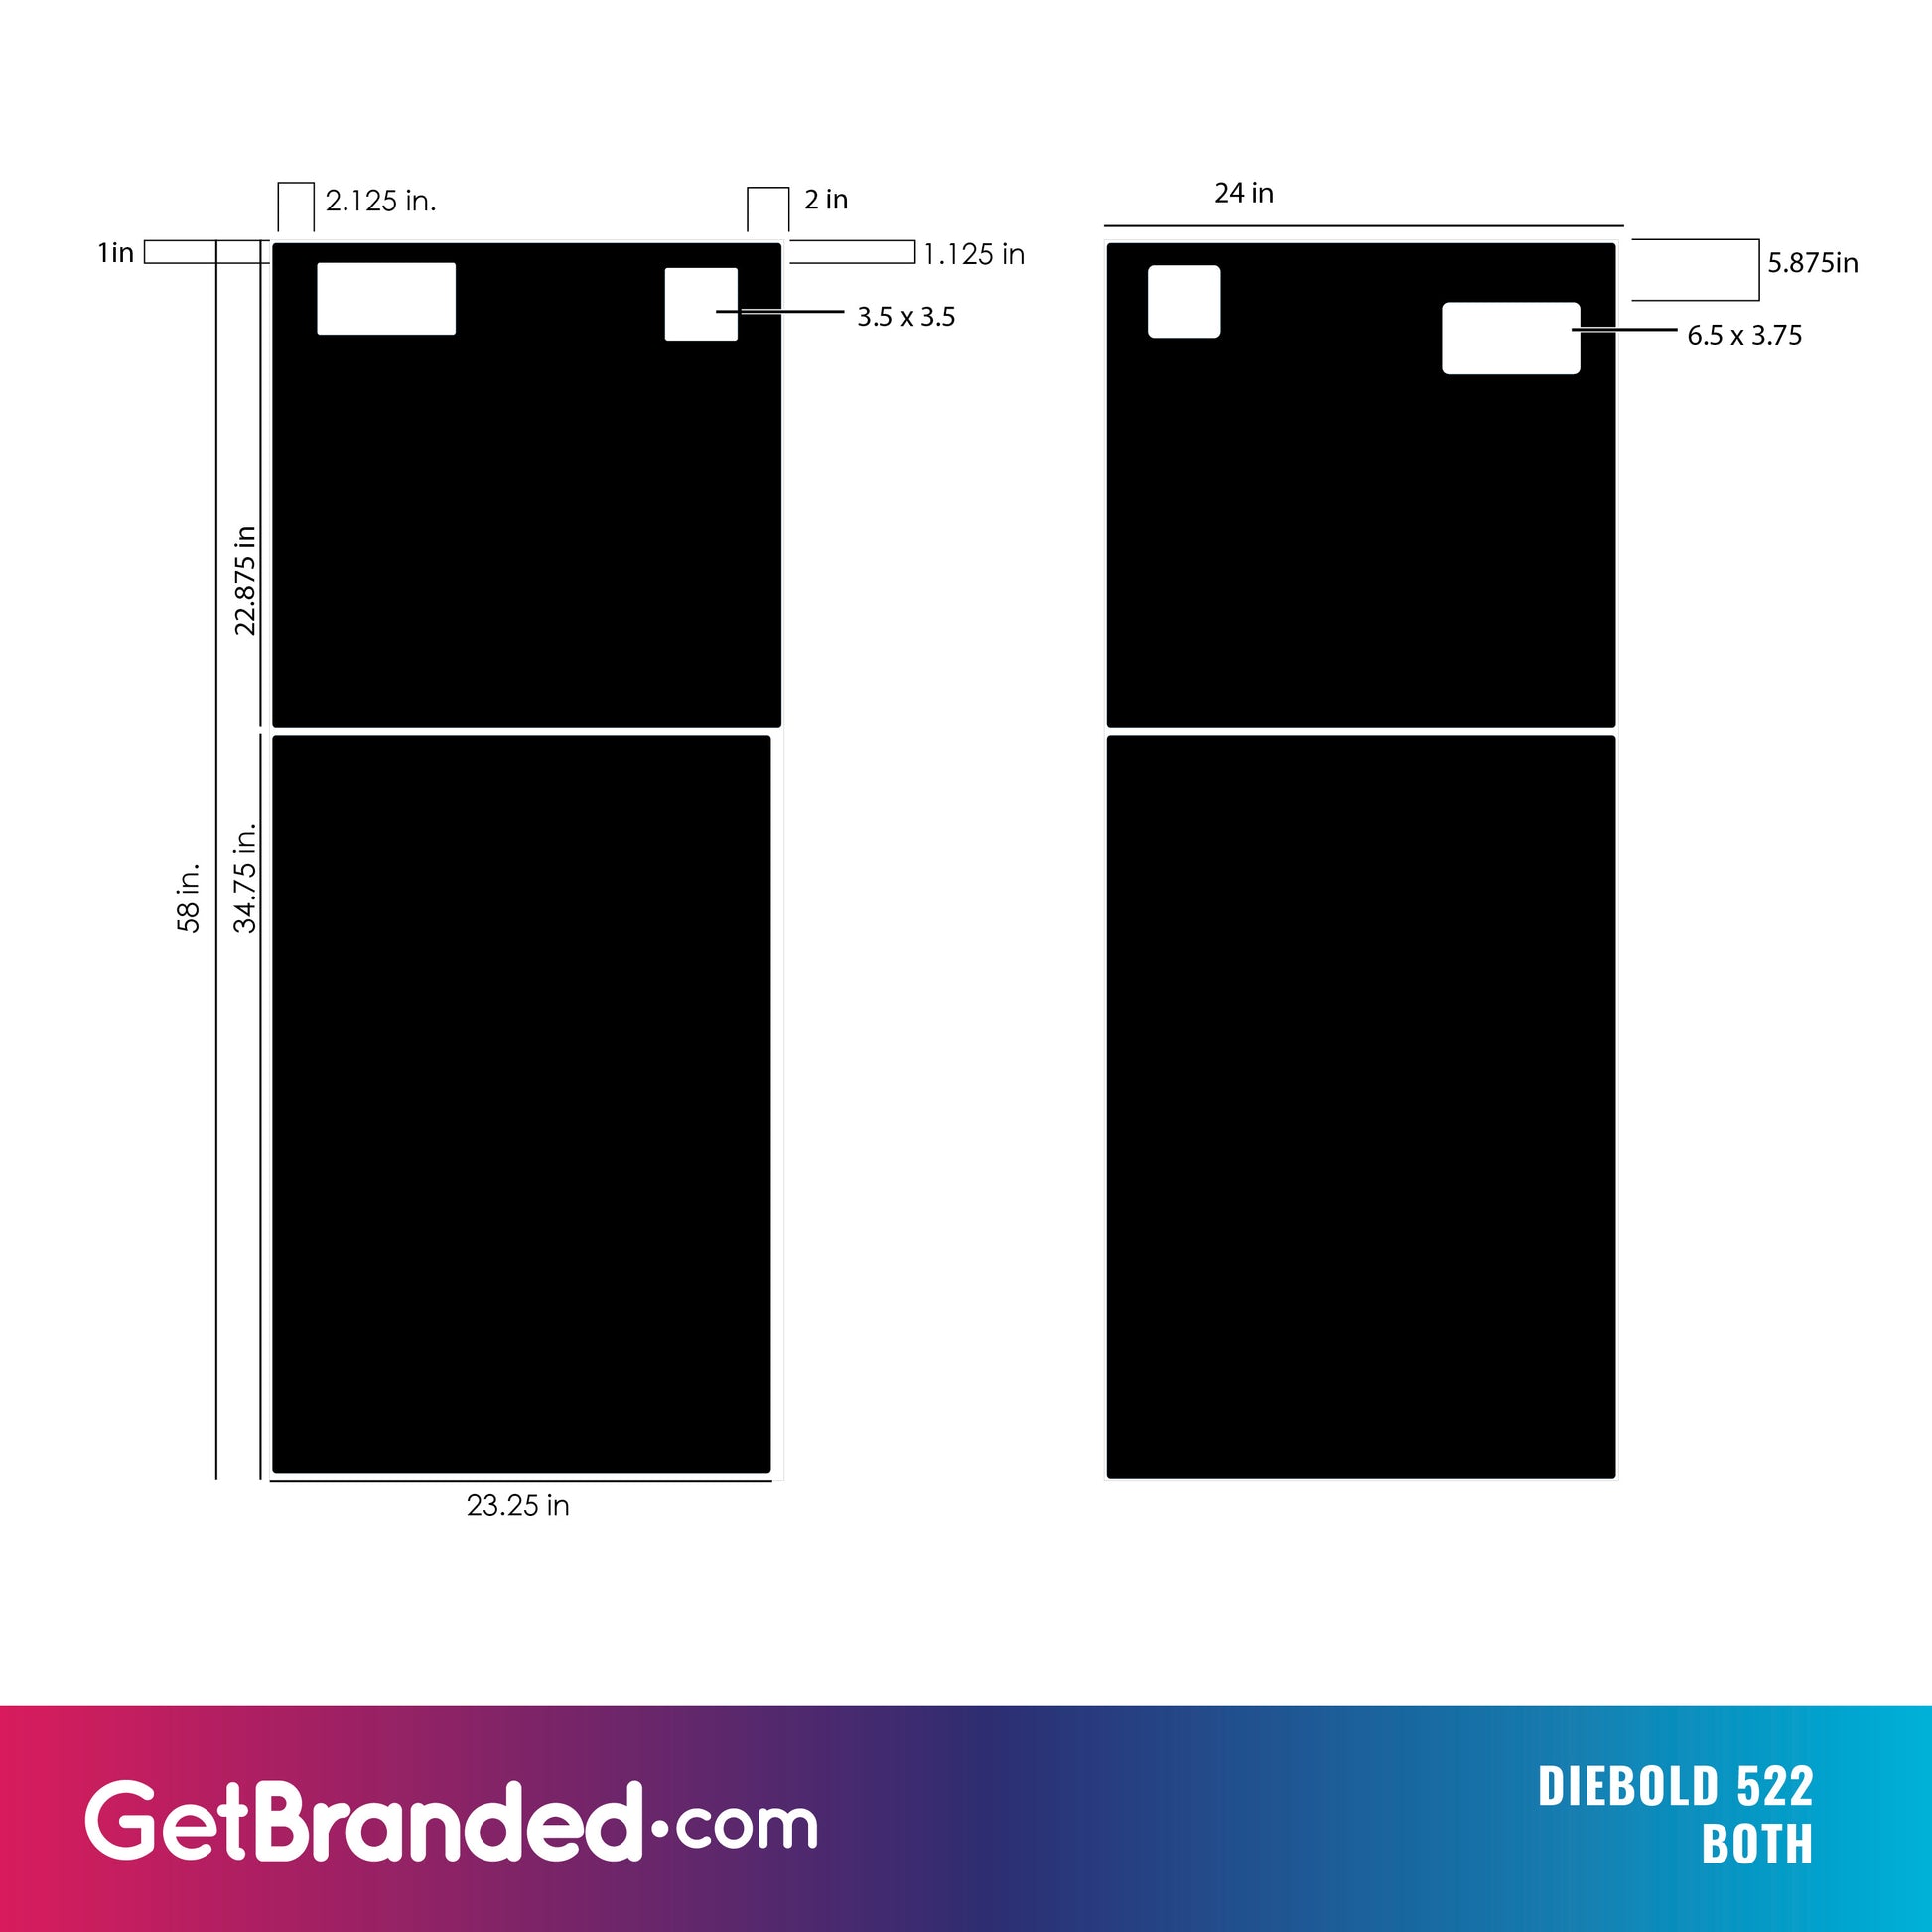 Diebold 522 both side panels dimensions